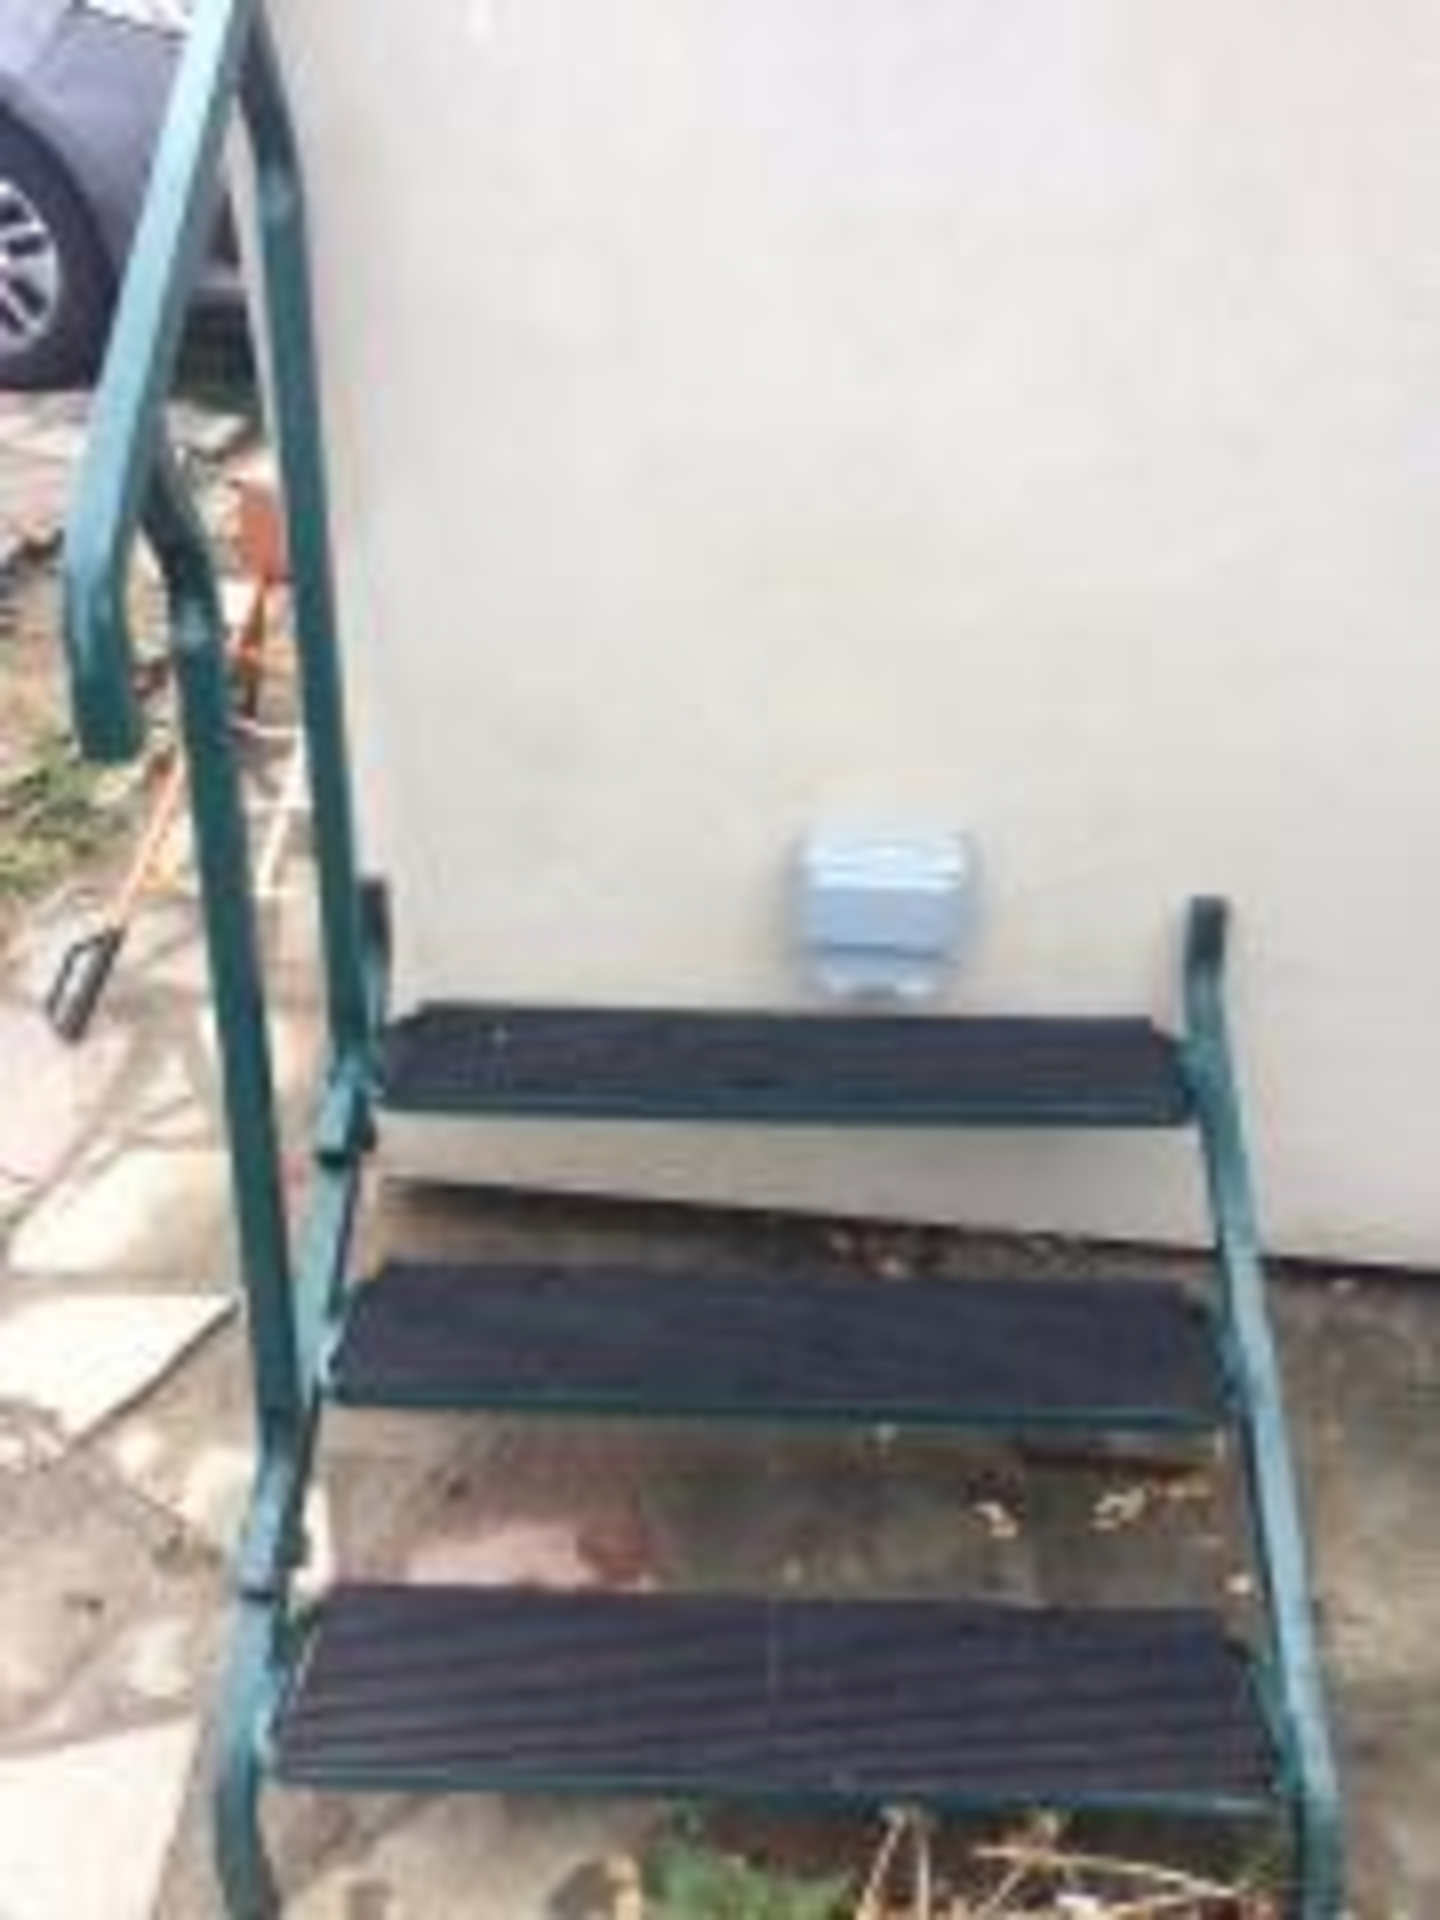 Set Caravan Steps – Buyer to collect from Orpington